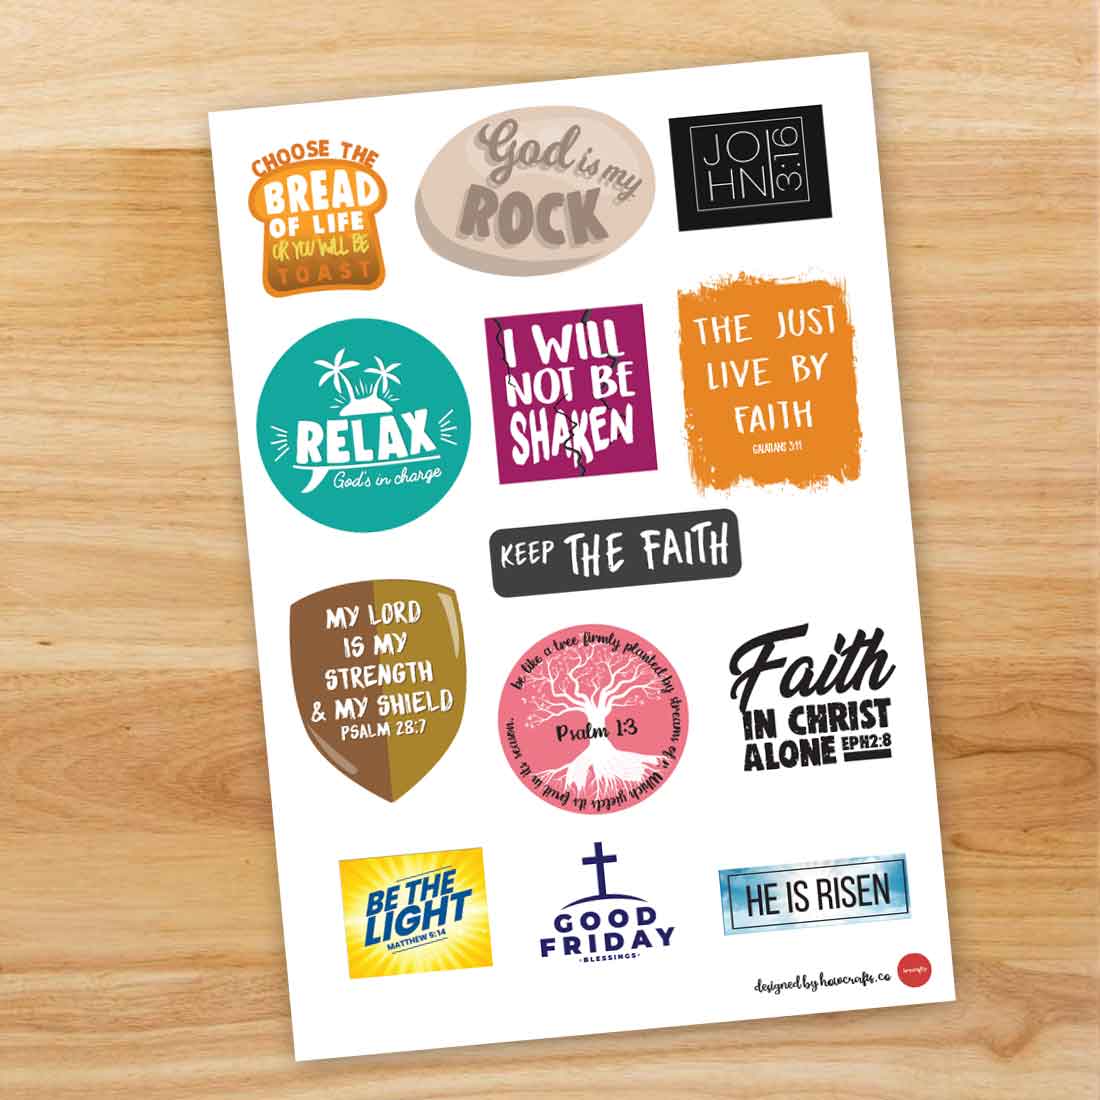 Bible Verse Stickers for Sale  Aesthetic stickers, Printable